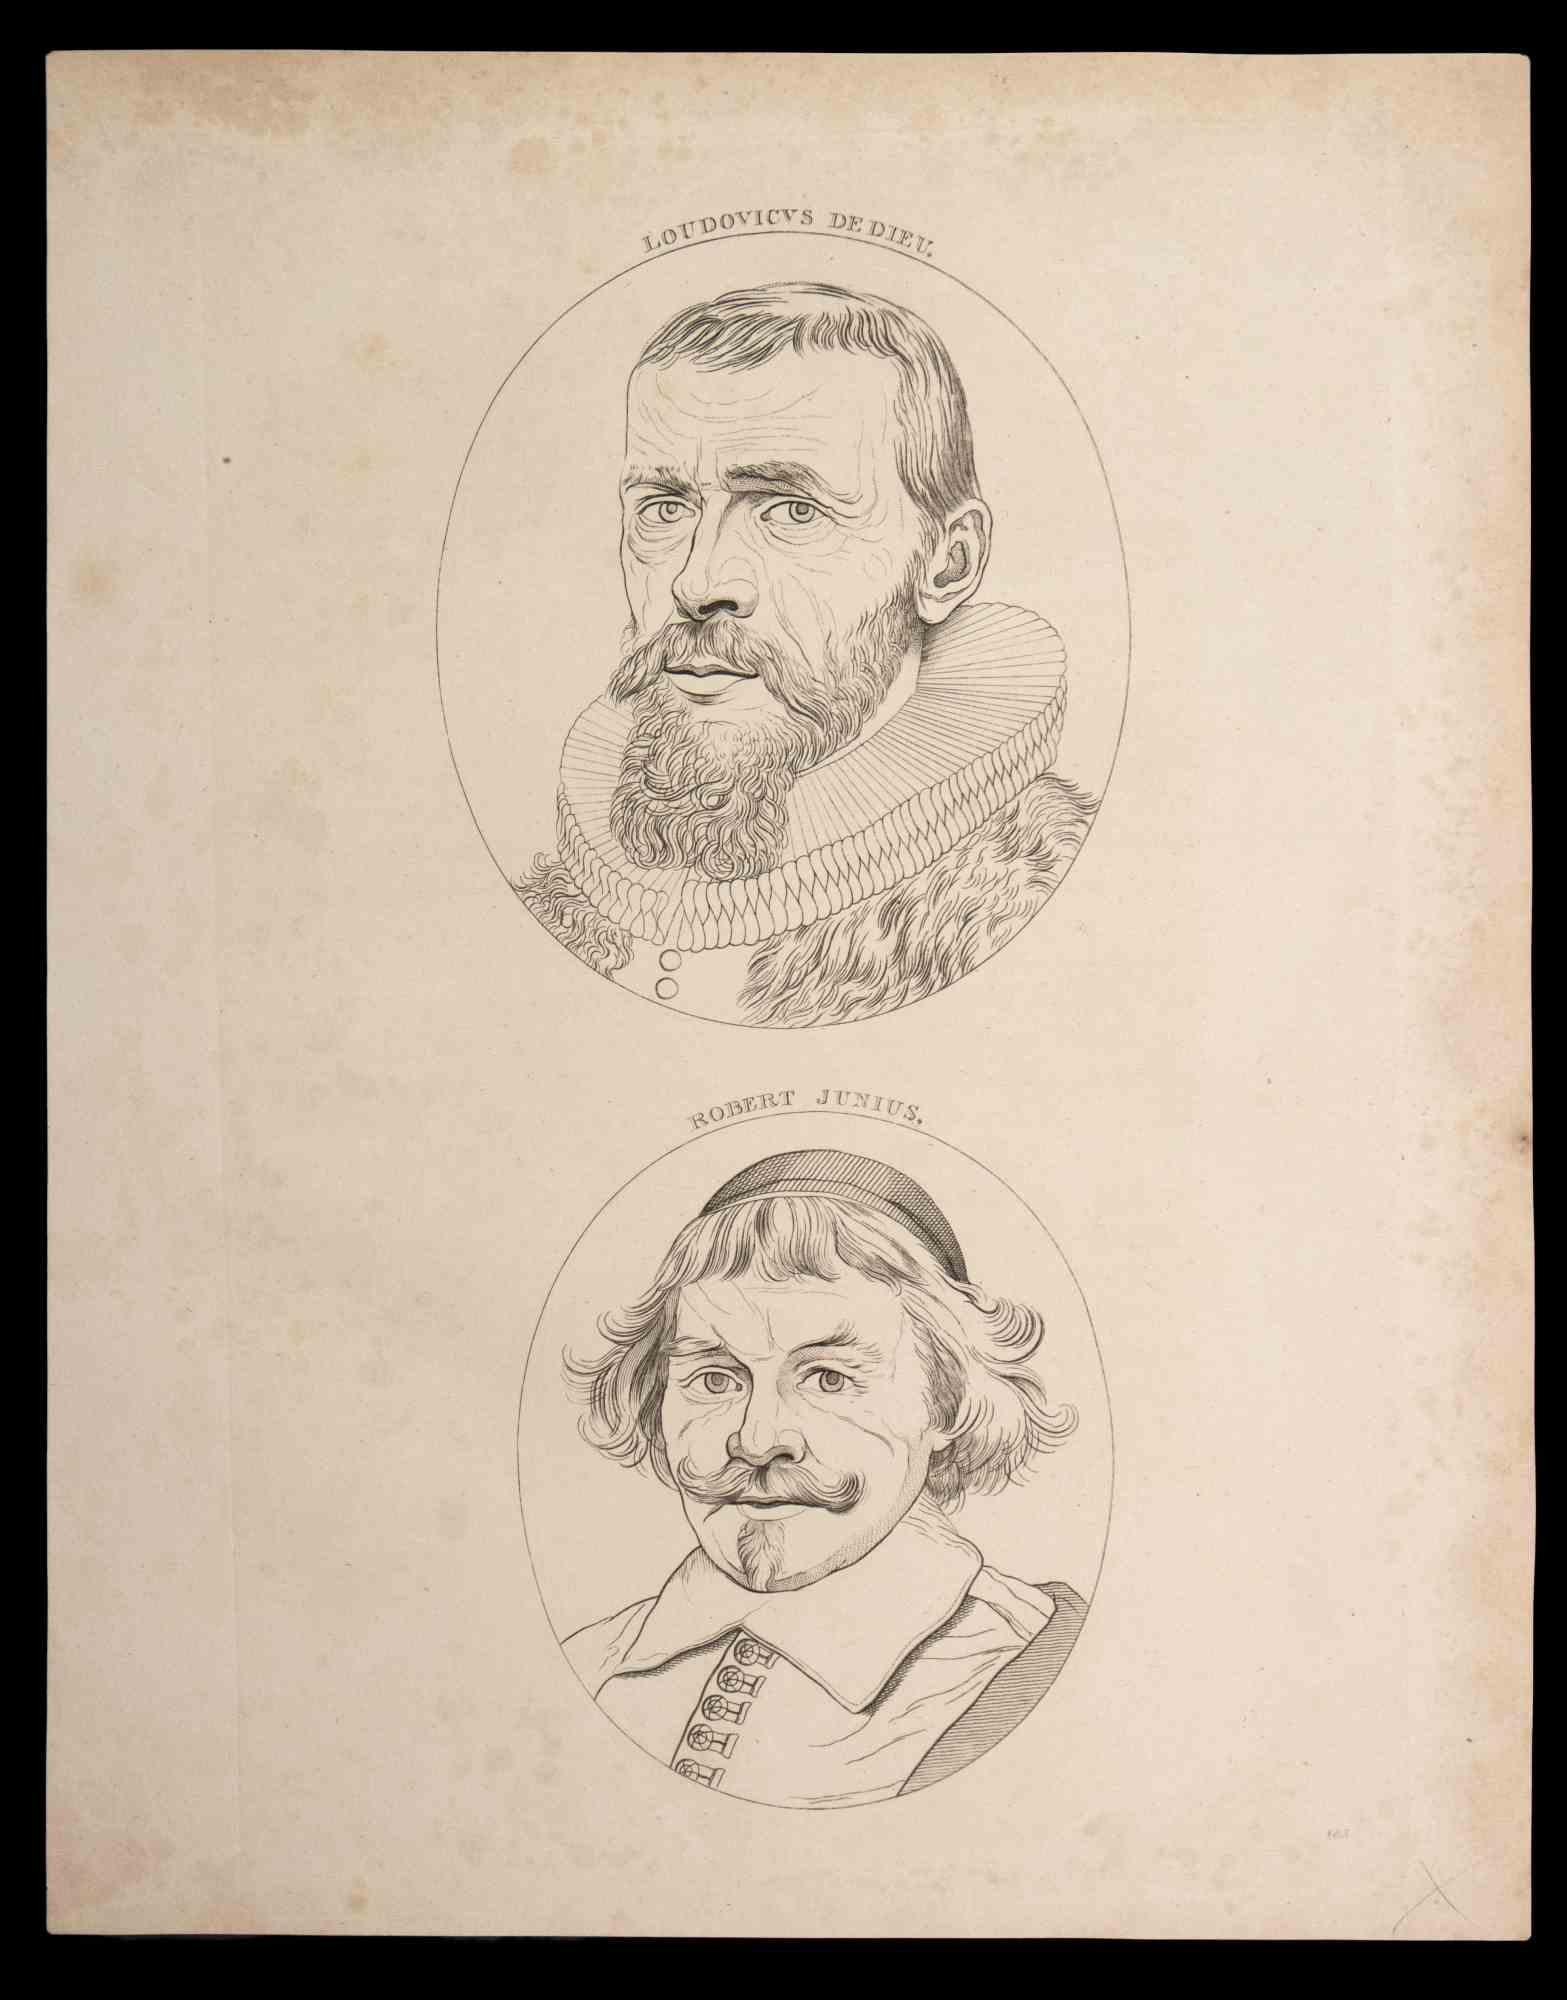 Portraits is an original etching artwork realized by Thomas Holloway for Johann Caspar Lavater's "Essays on Physiognomy, Designed to Promote the Knowledge and the Love of Mankind", London, Bensley, 1810. 

Titled at the top of each oval frame of the